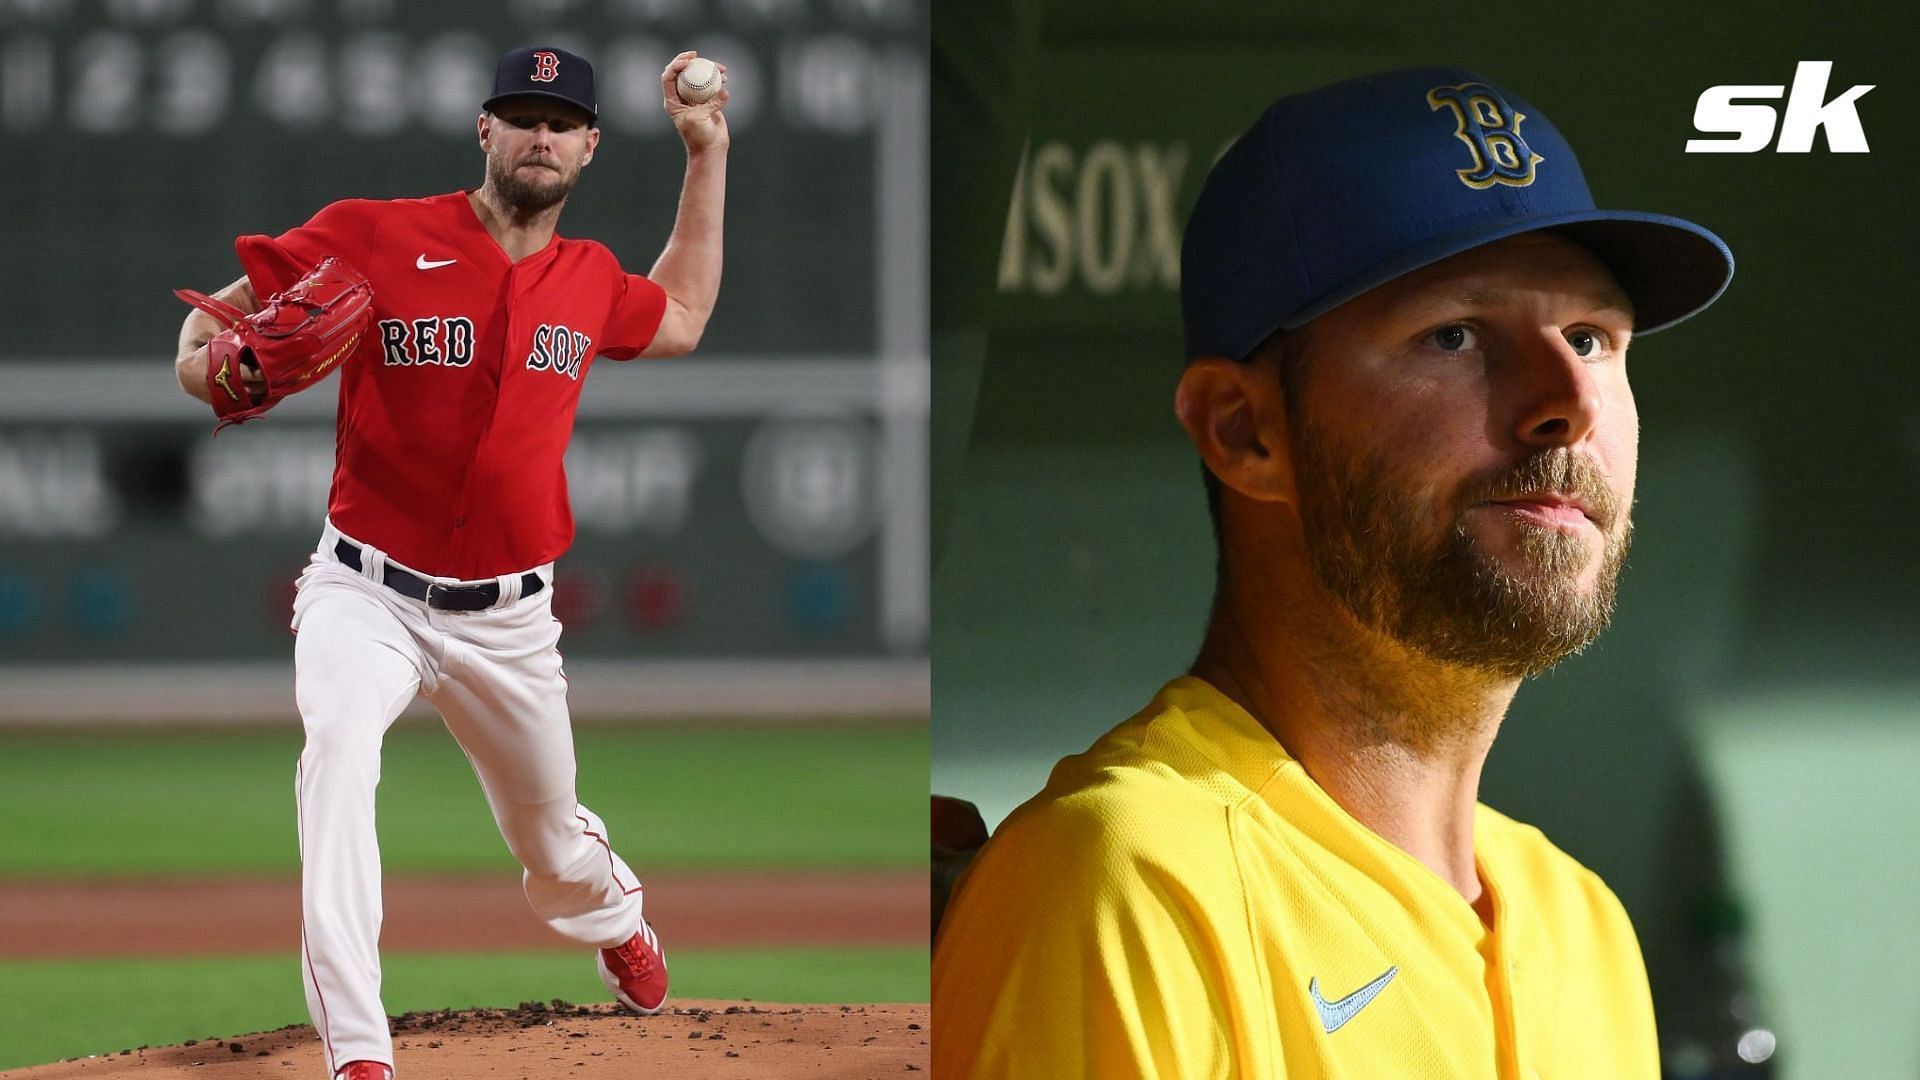 Chris Sale believes injuries made his tenure with the Boston Red Sox an unsuccessful one